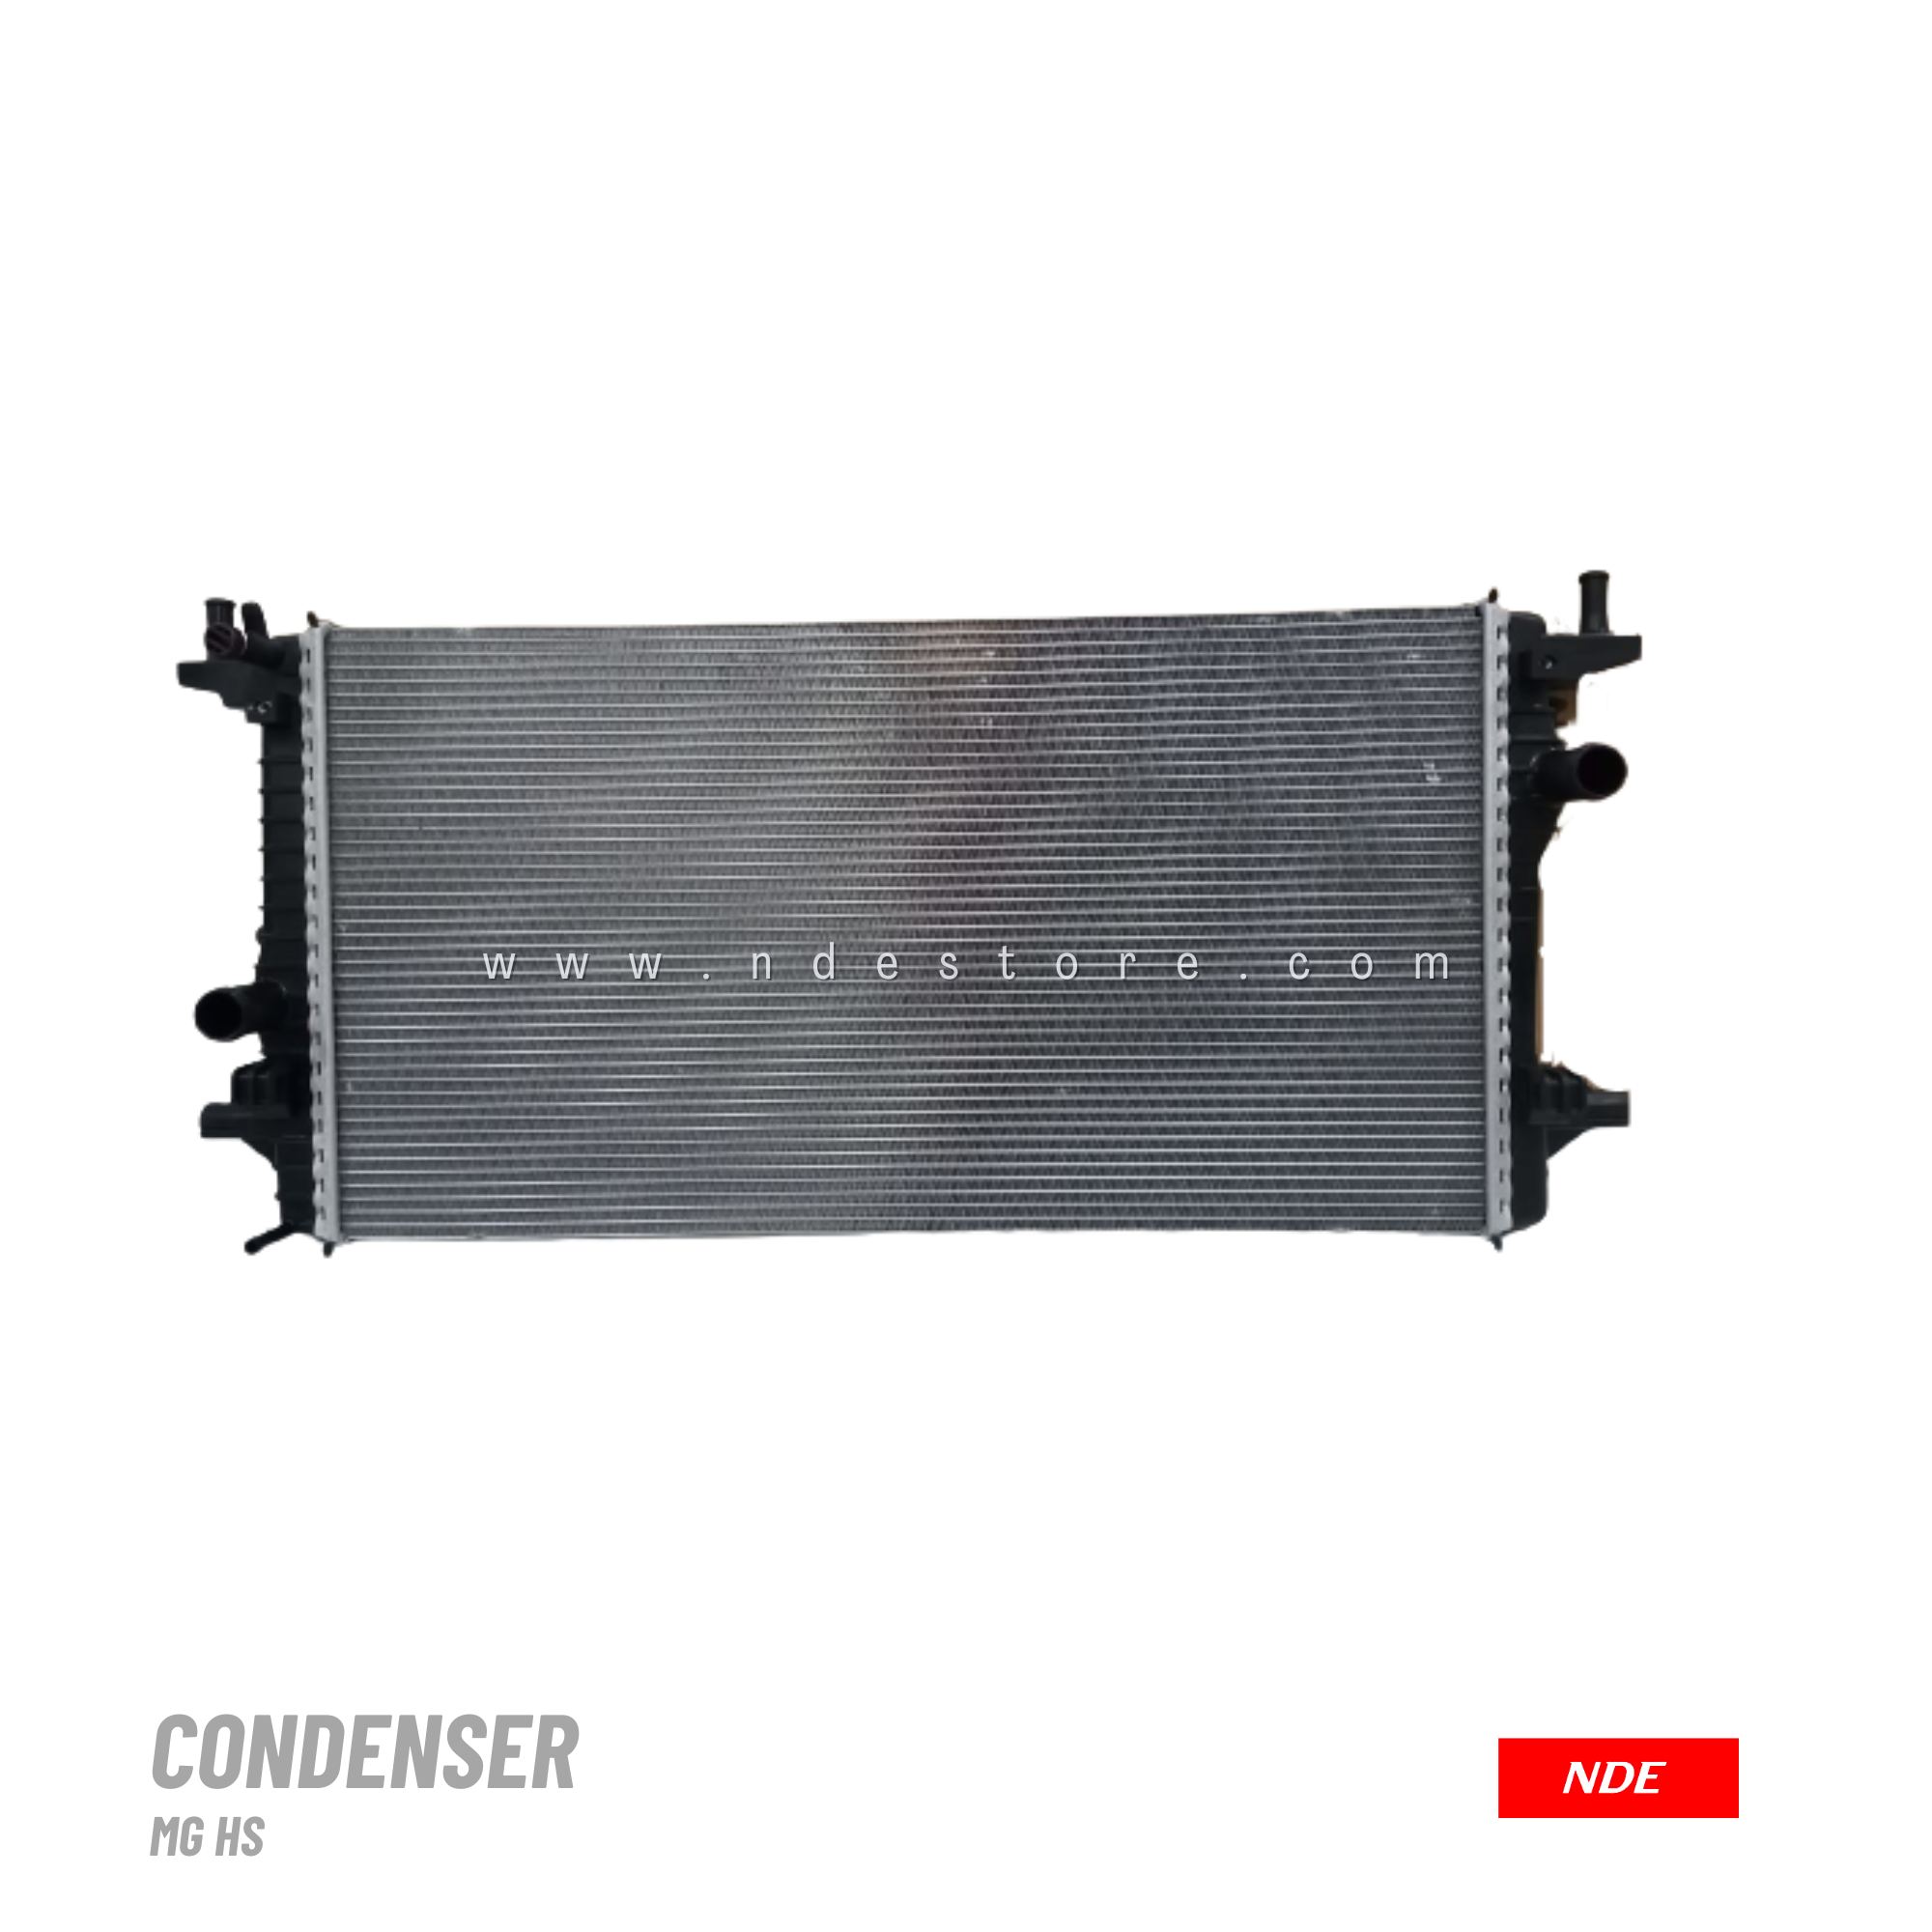 CONDENSER ASSY, COMPLETE FOR MG HS